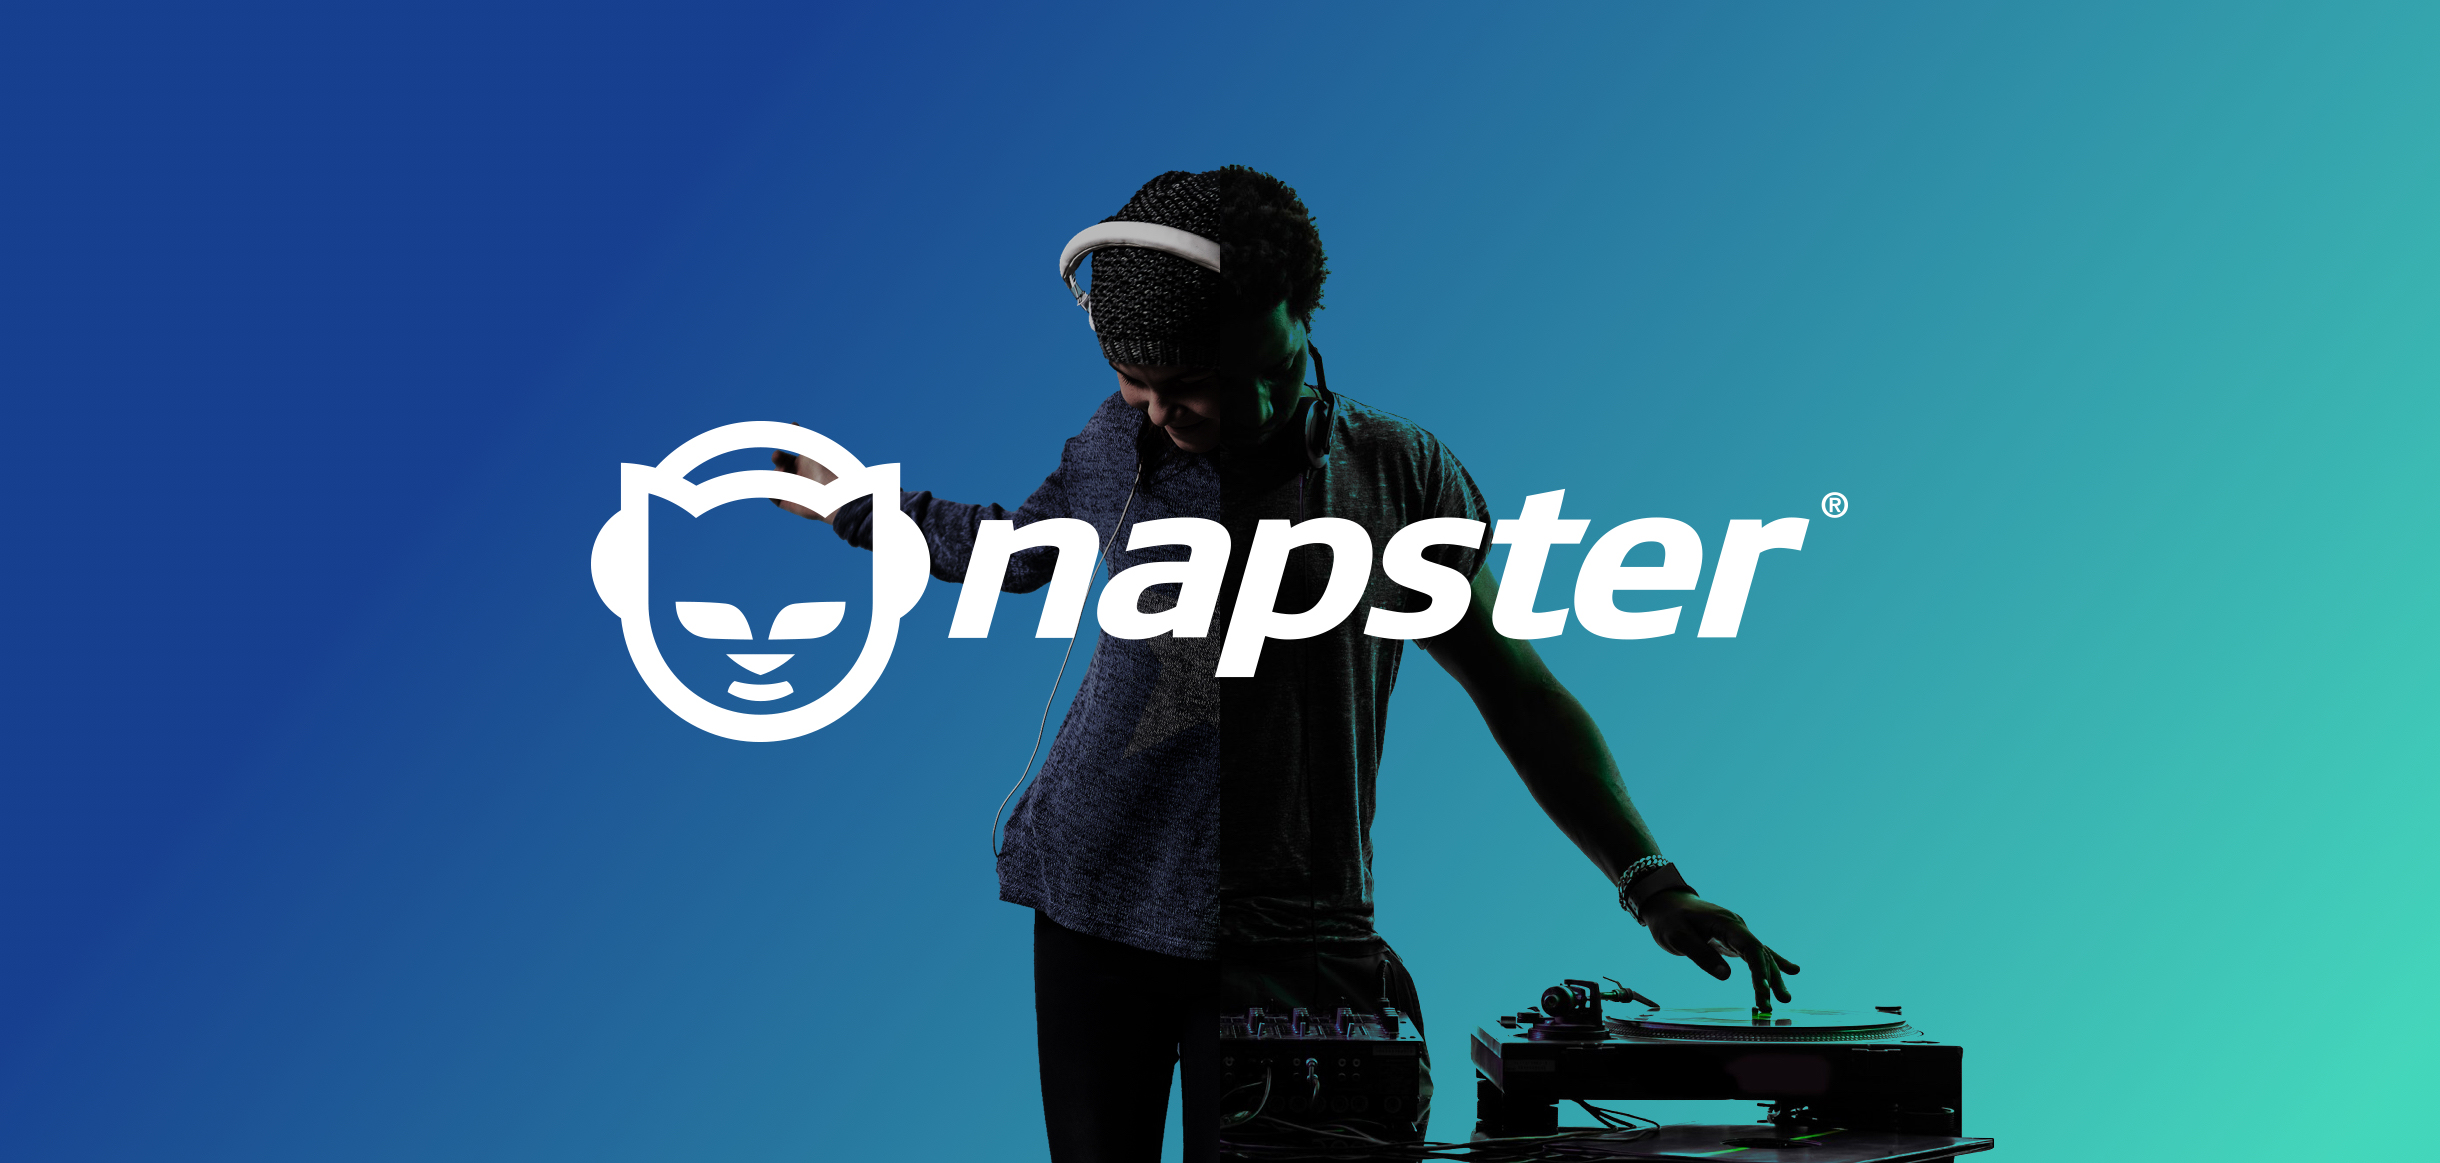 How to get your music on Napster as an unsigned artist